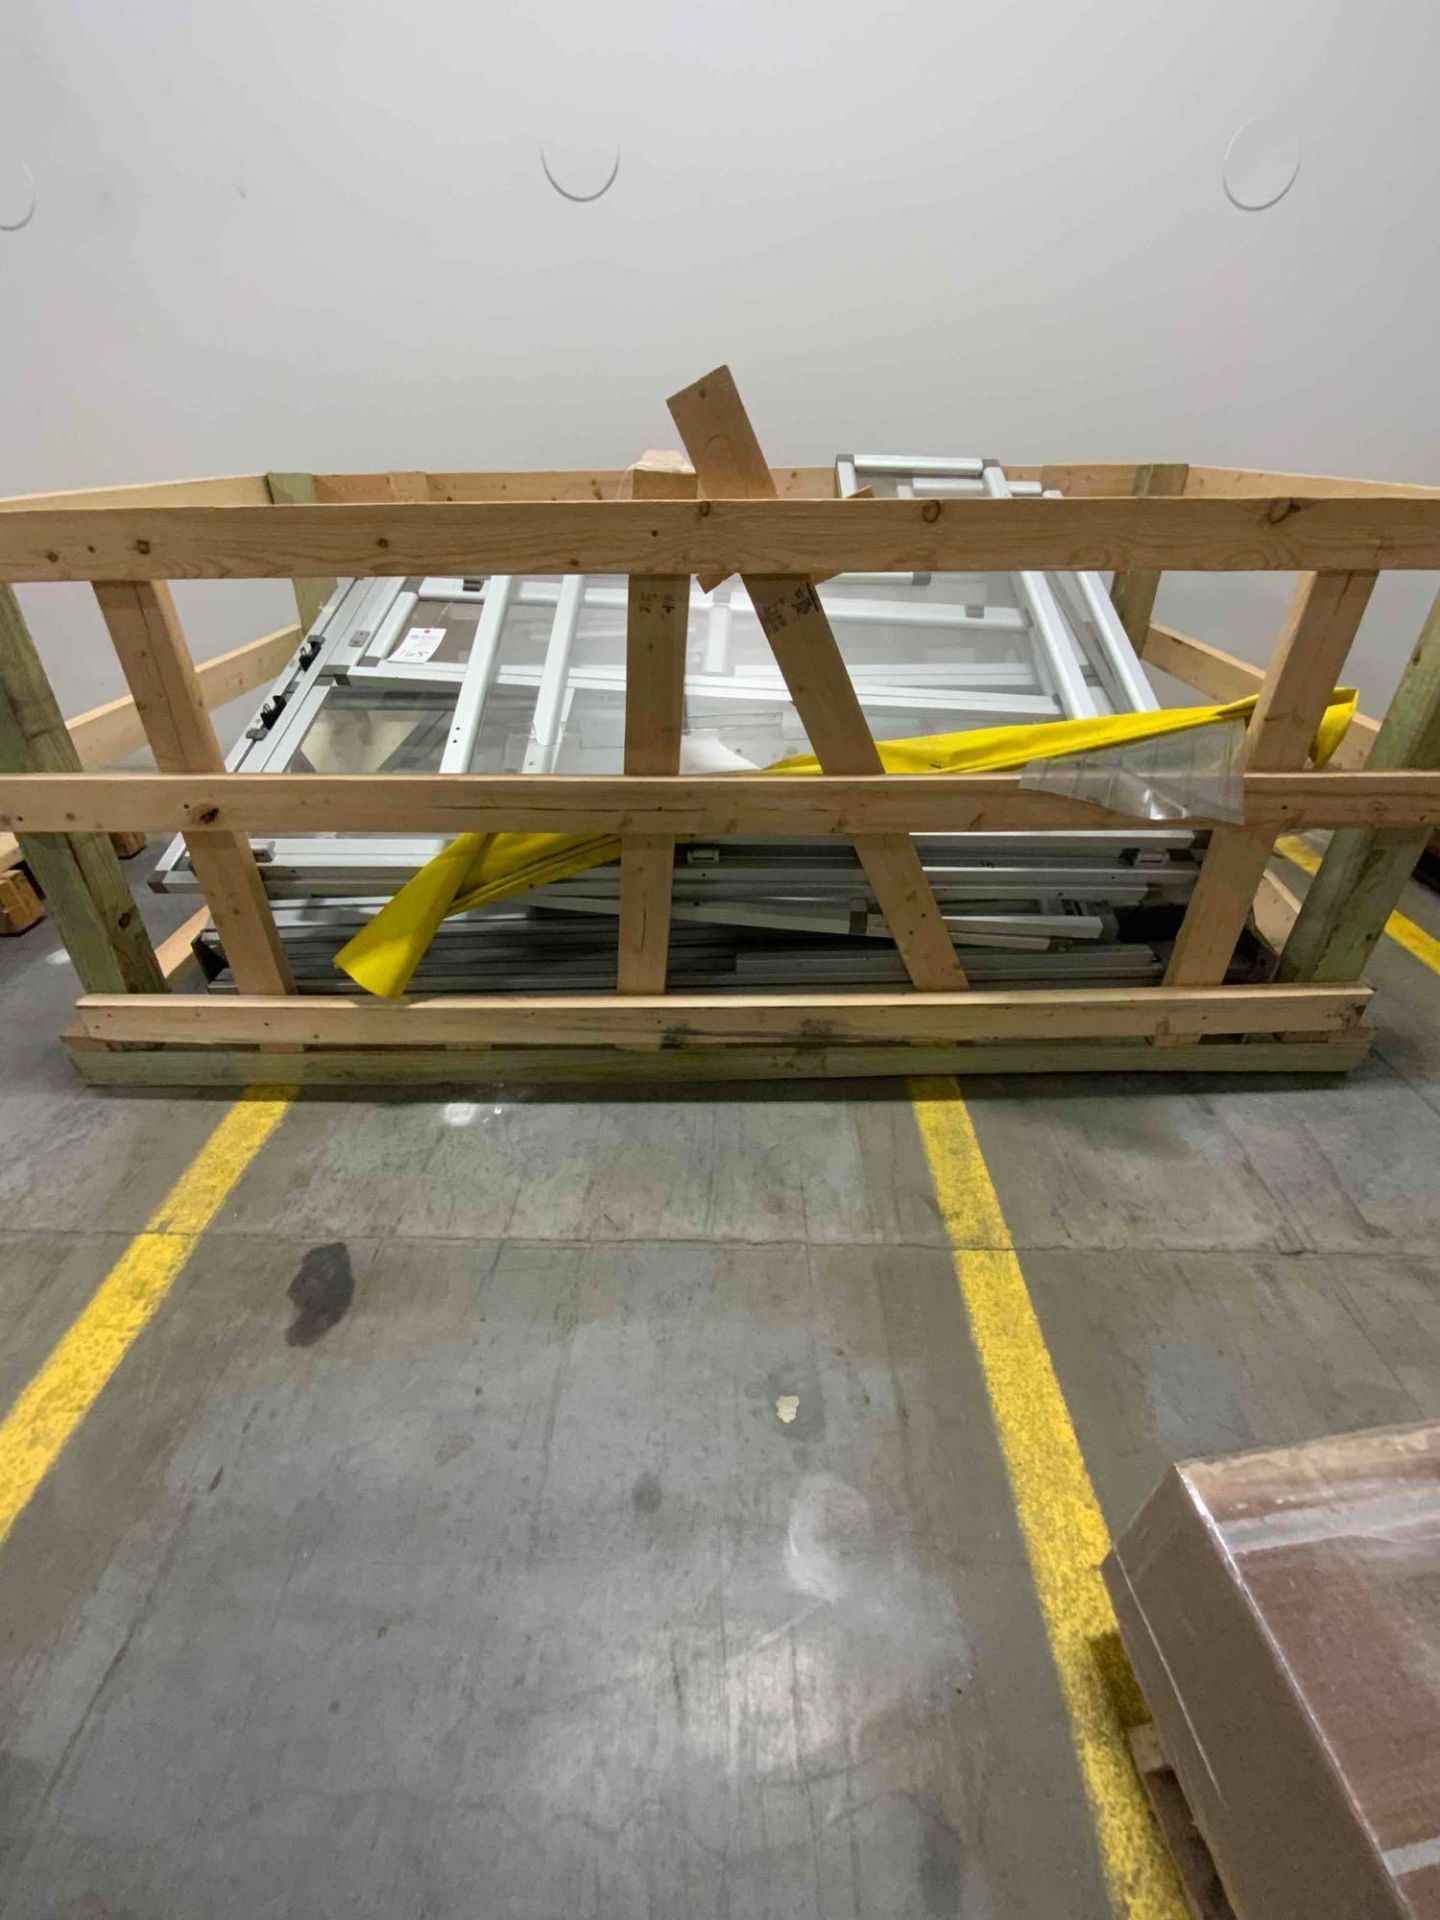 Skeleton Crated Skid of Safety Guarding w/ Posts - Image 4 of 5